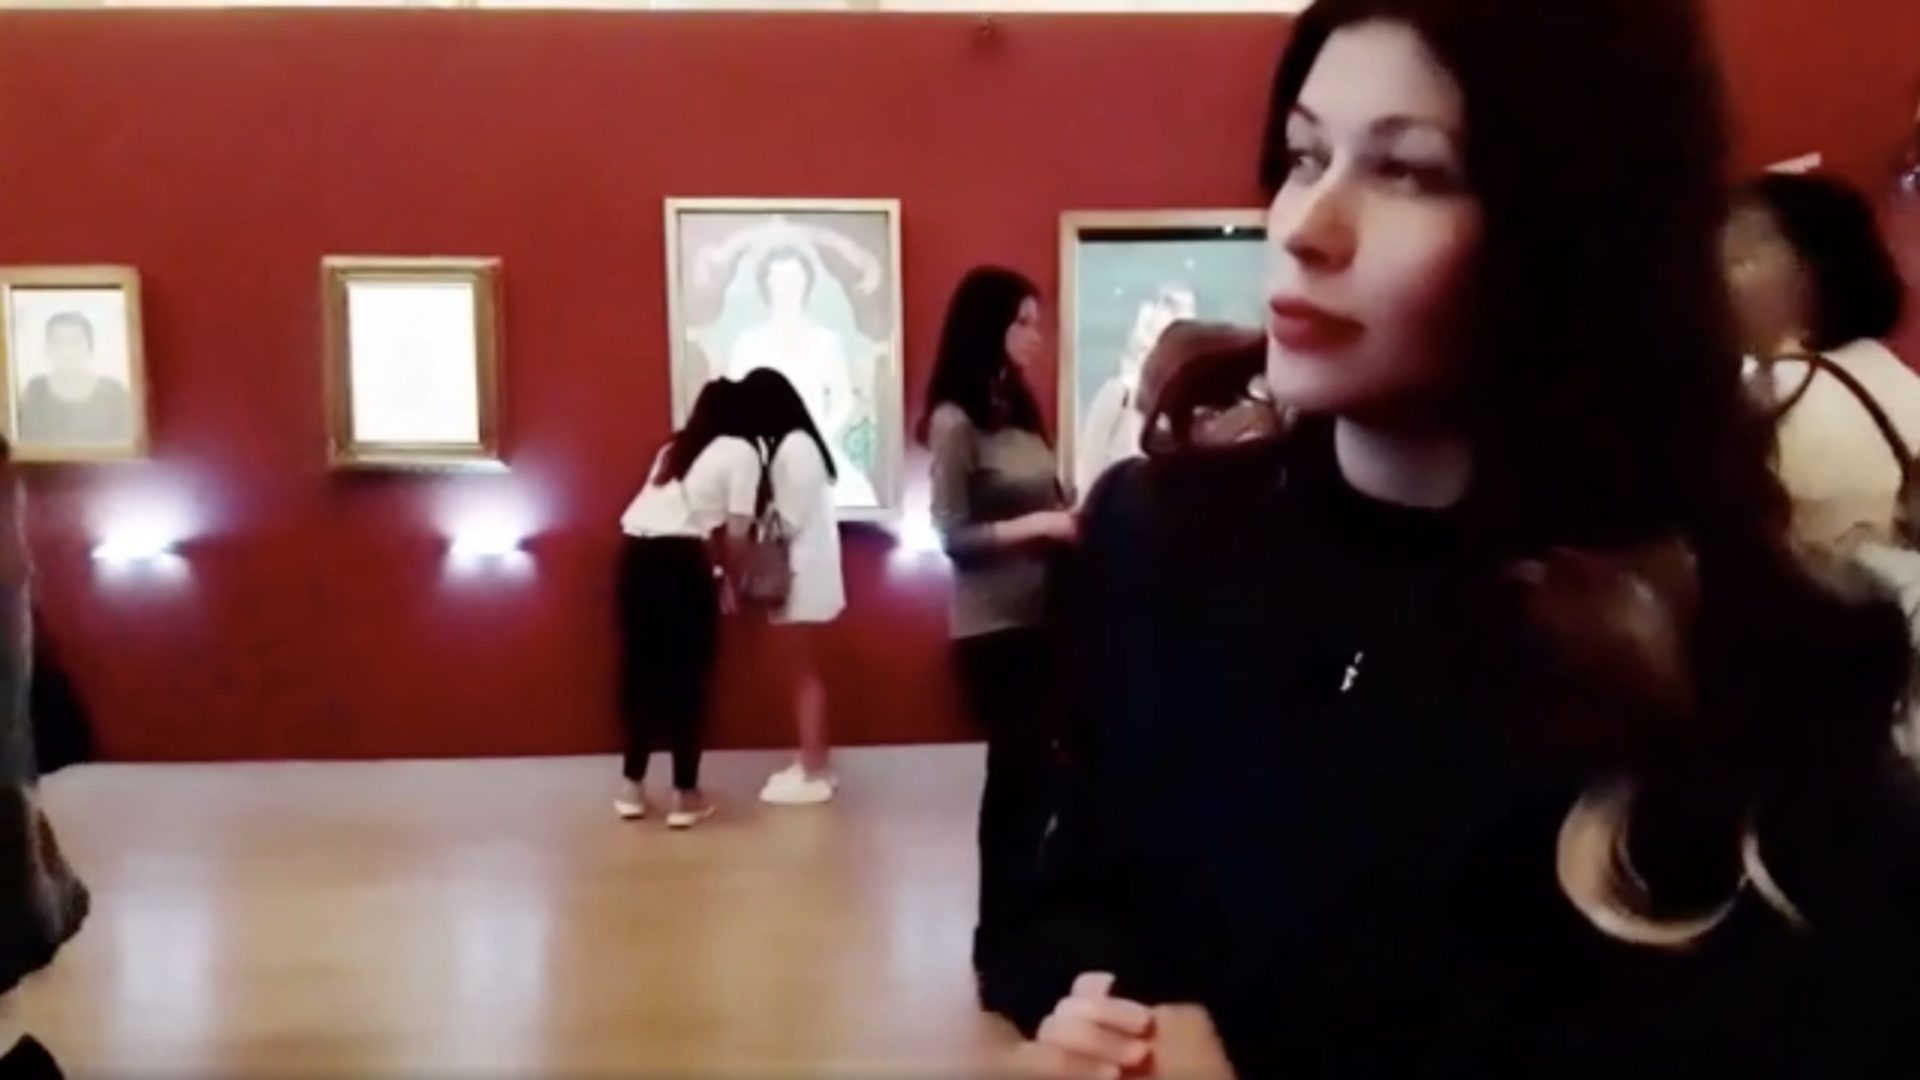 Live from Fabergé Museum, Russia